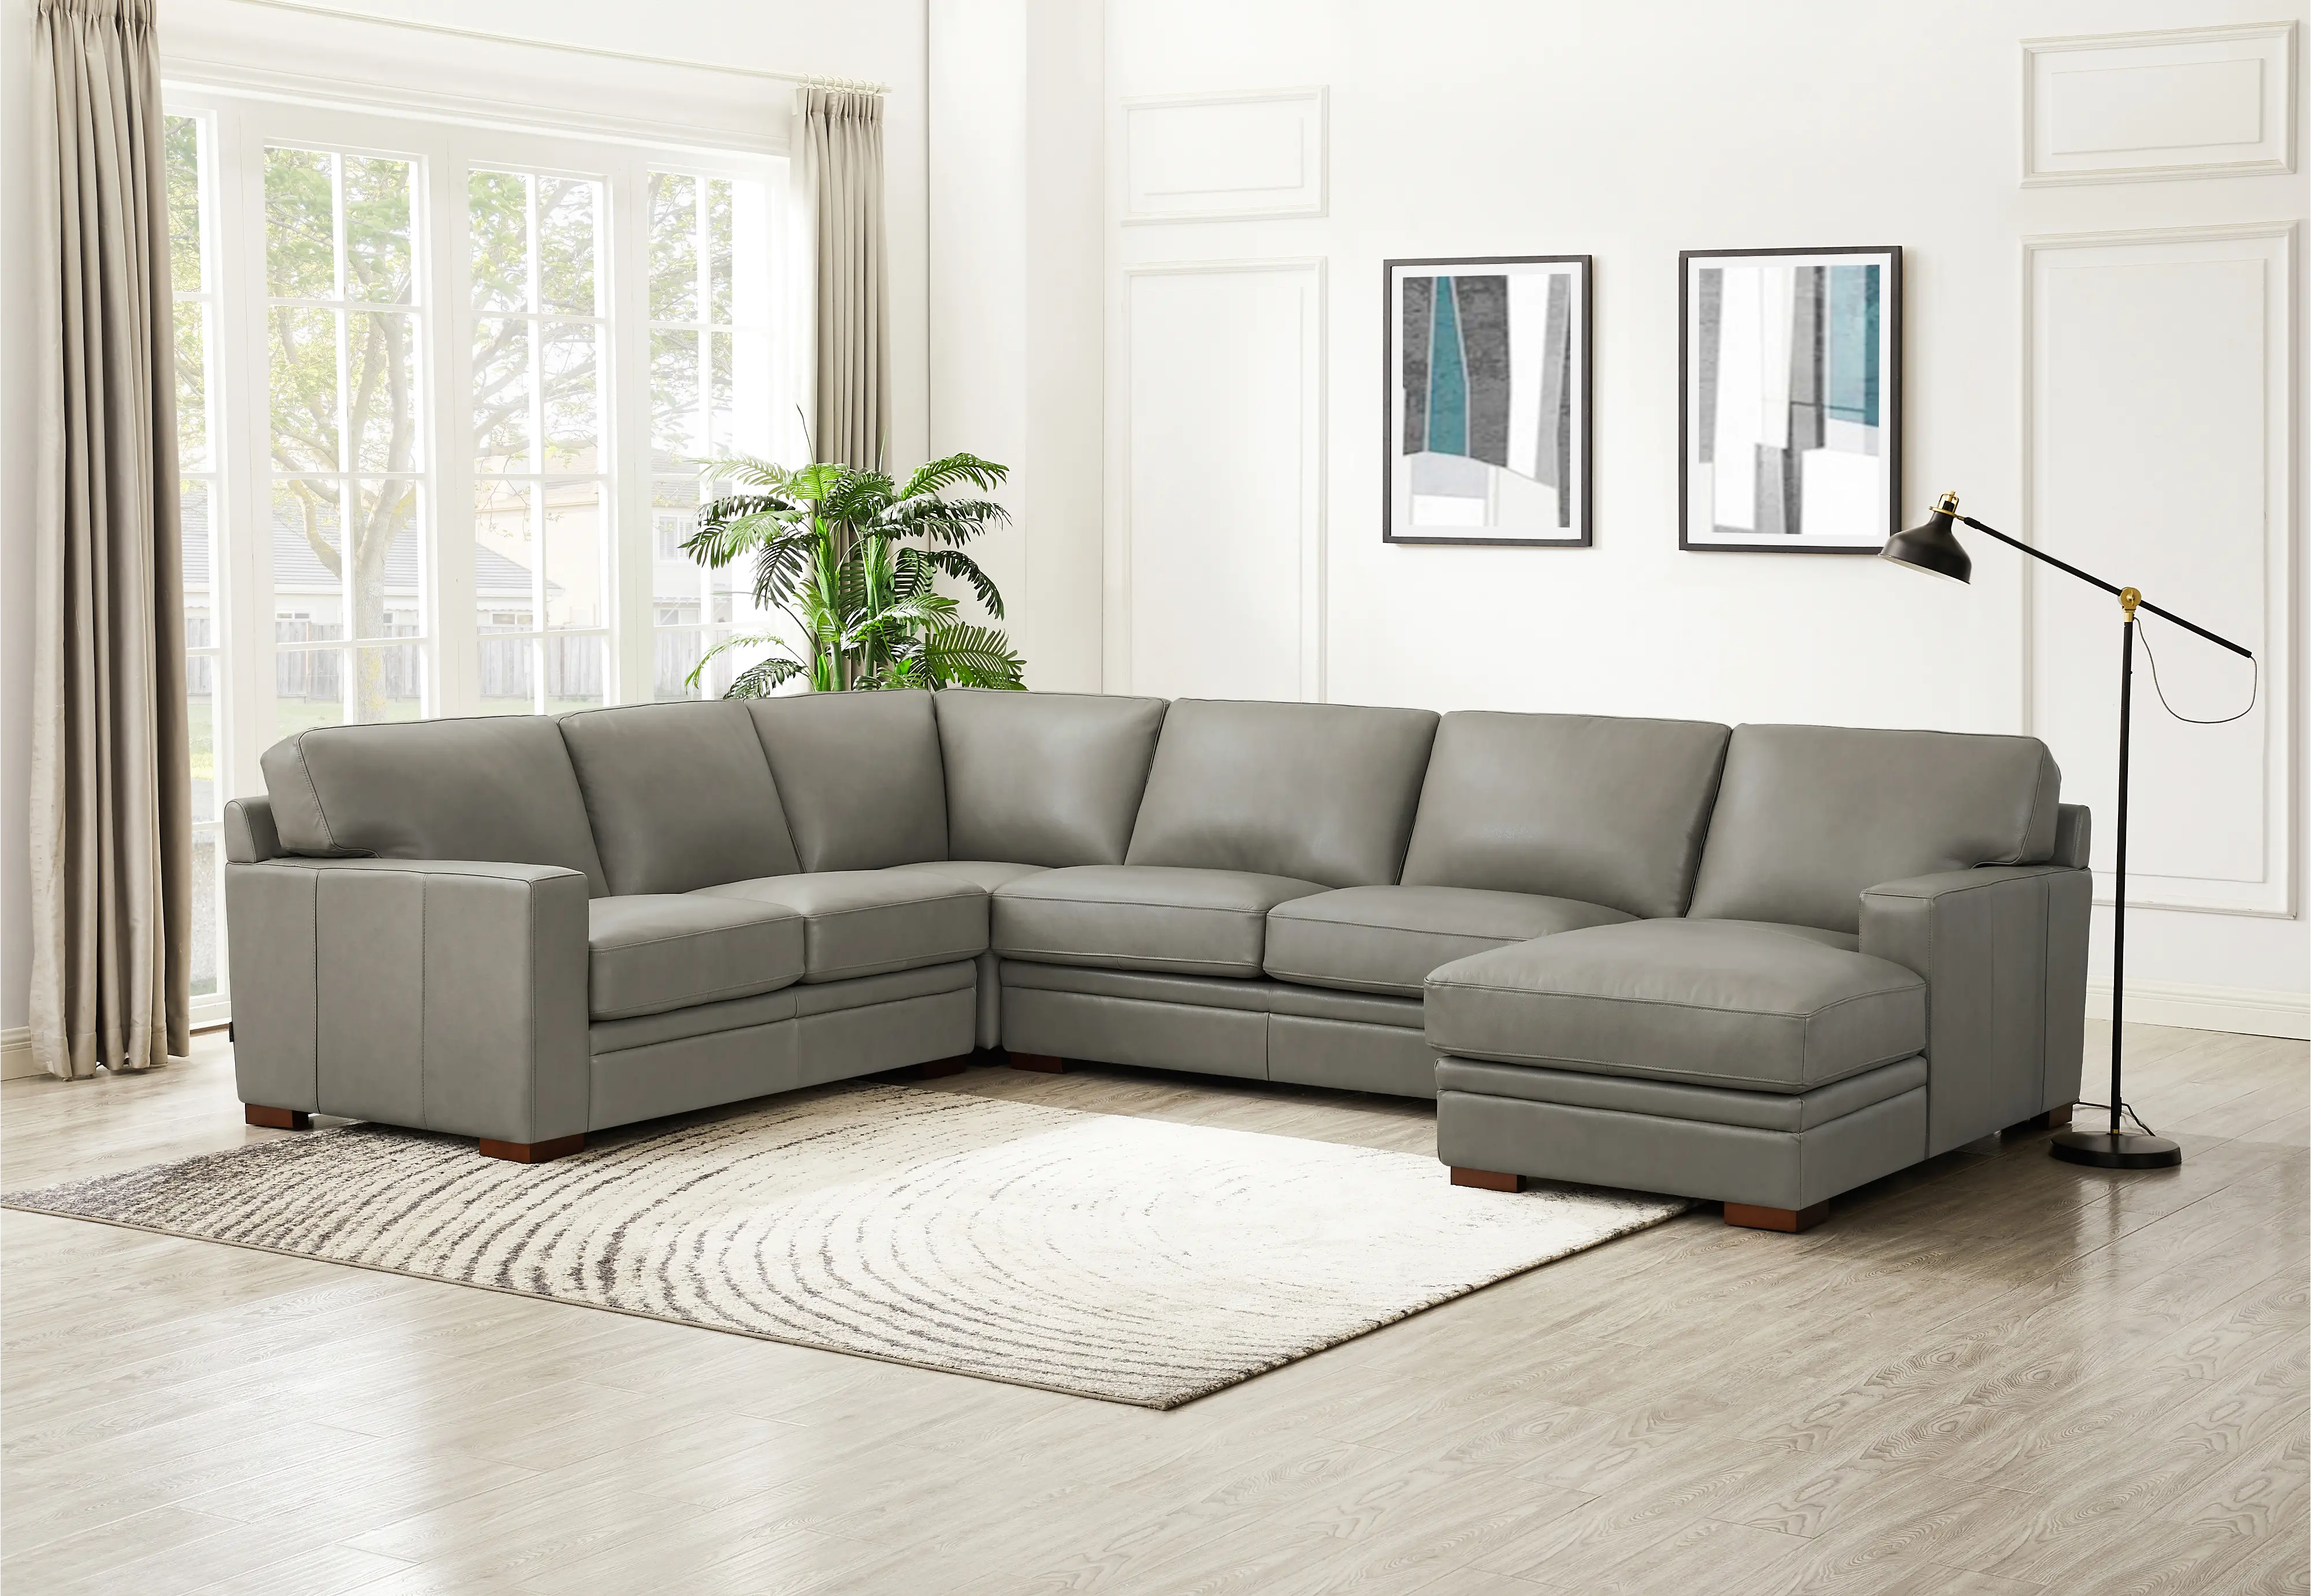 7727-SECT4-RHFCH-2376 Chatsworth Gray Leather 4 Piece Sectional with Rig sku 7727-SECT4-RHFCH-2376